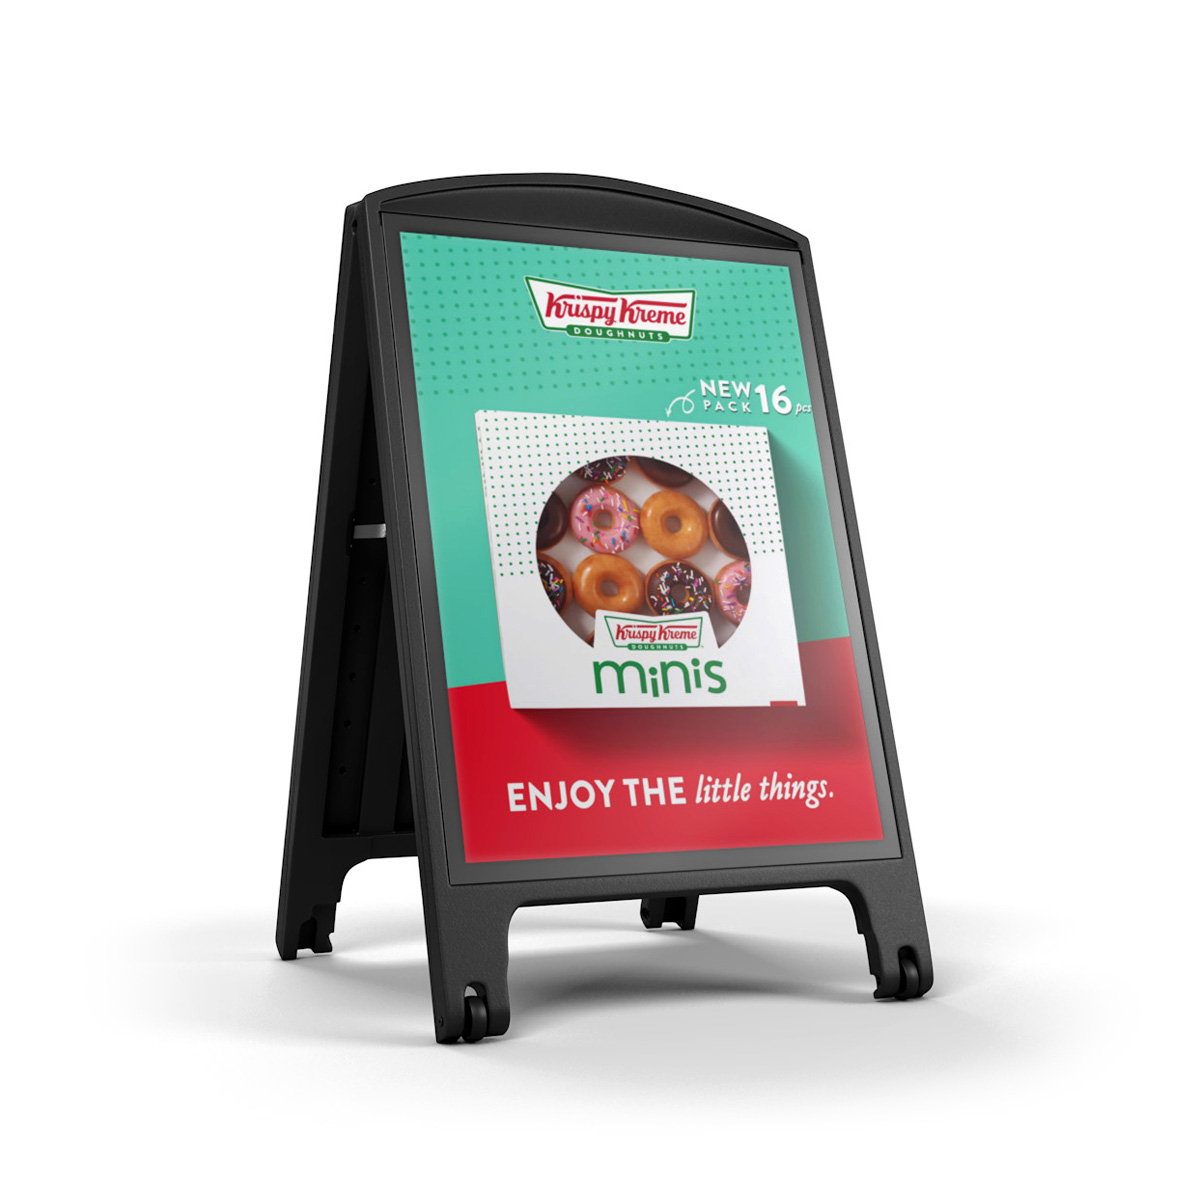 SIGNAL Double Sided Outdoor A-Board Street Sign Poster